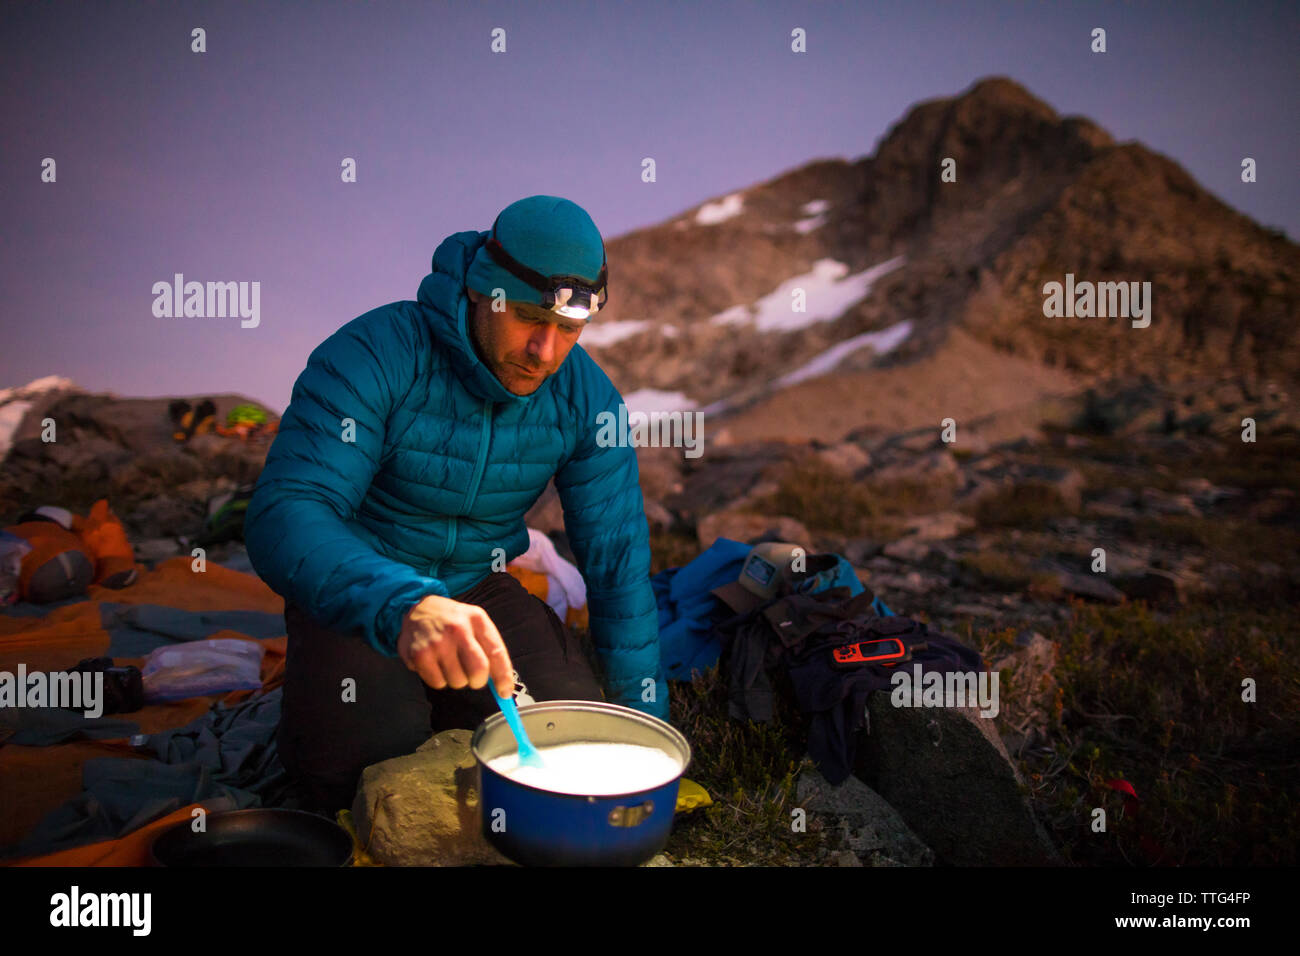 Backpacker cooking on camp stove and using headlamp at sunset Stock Photo